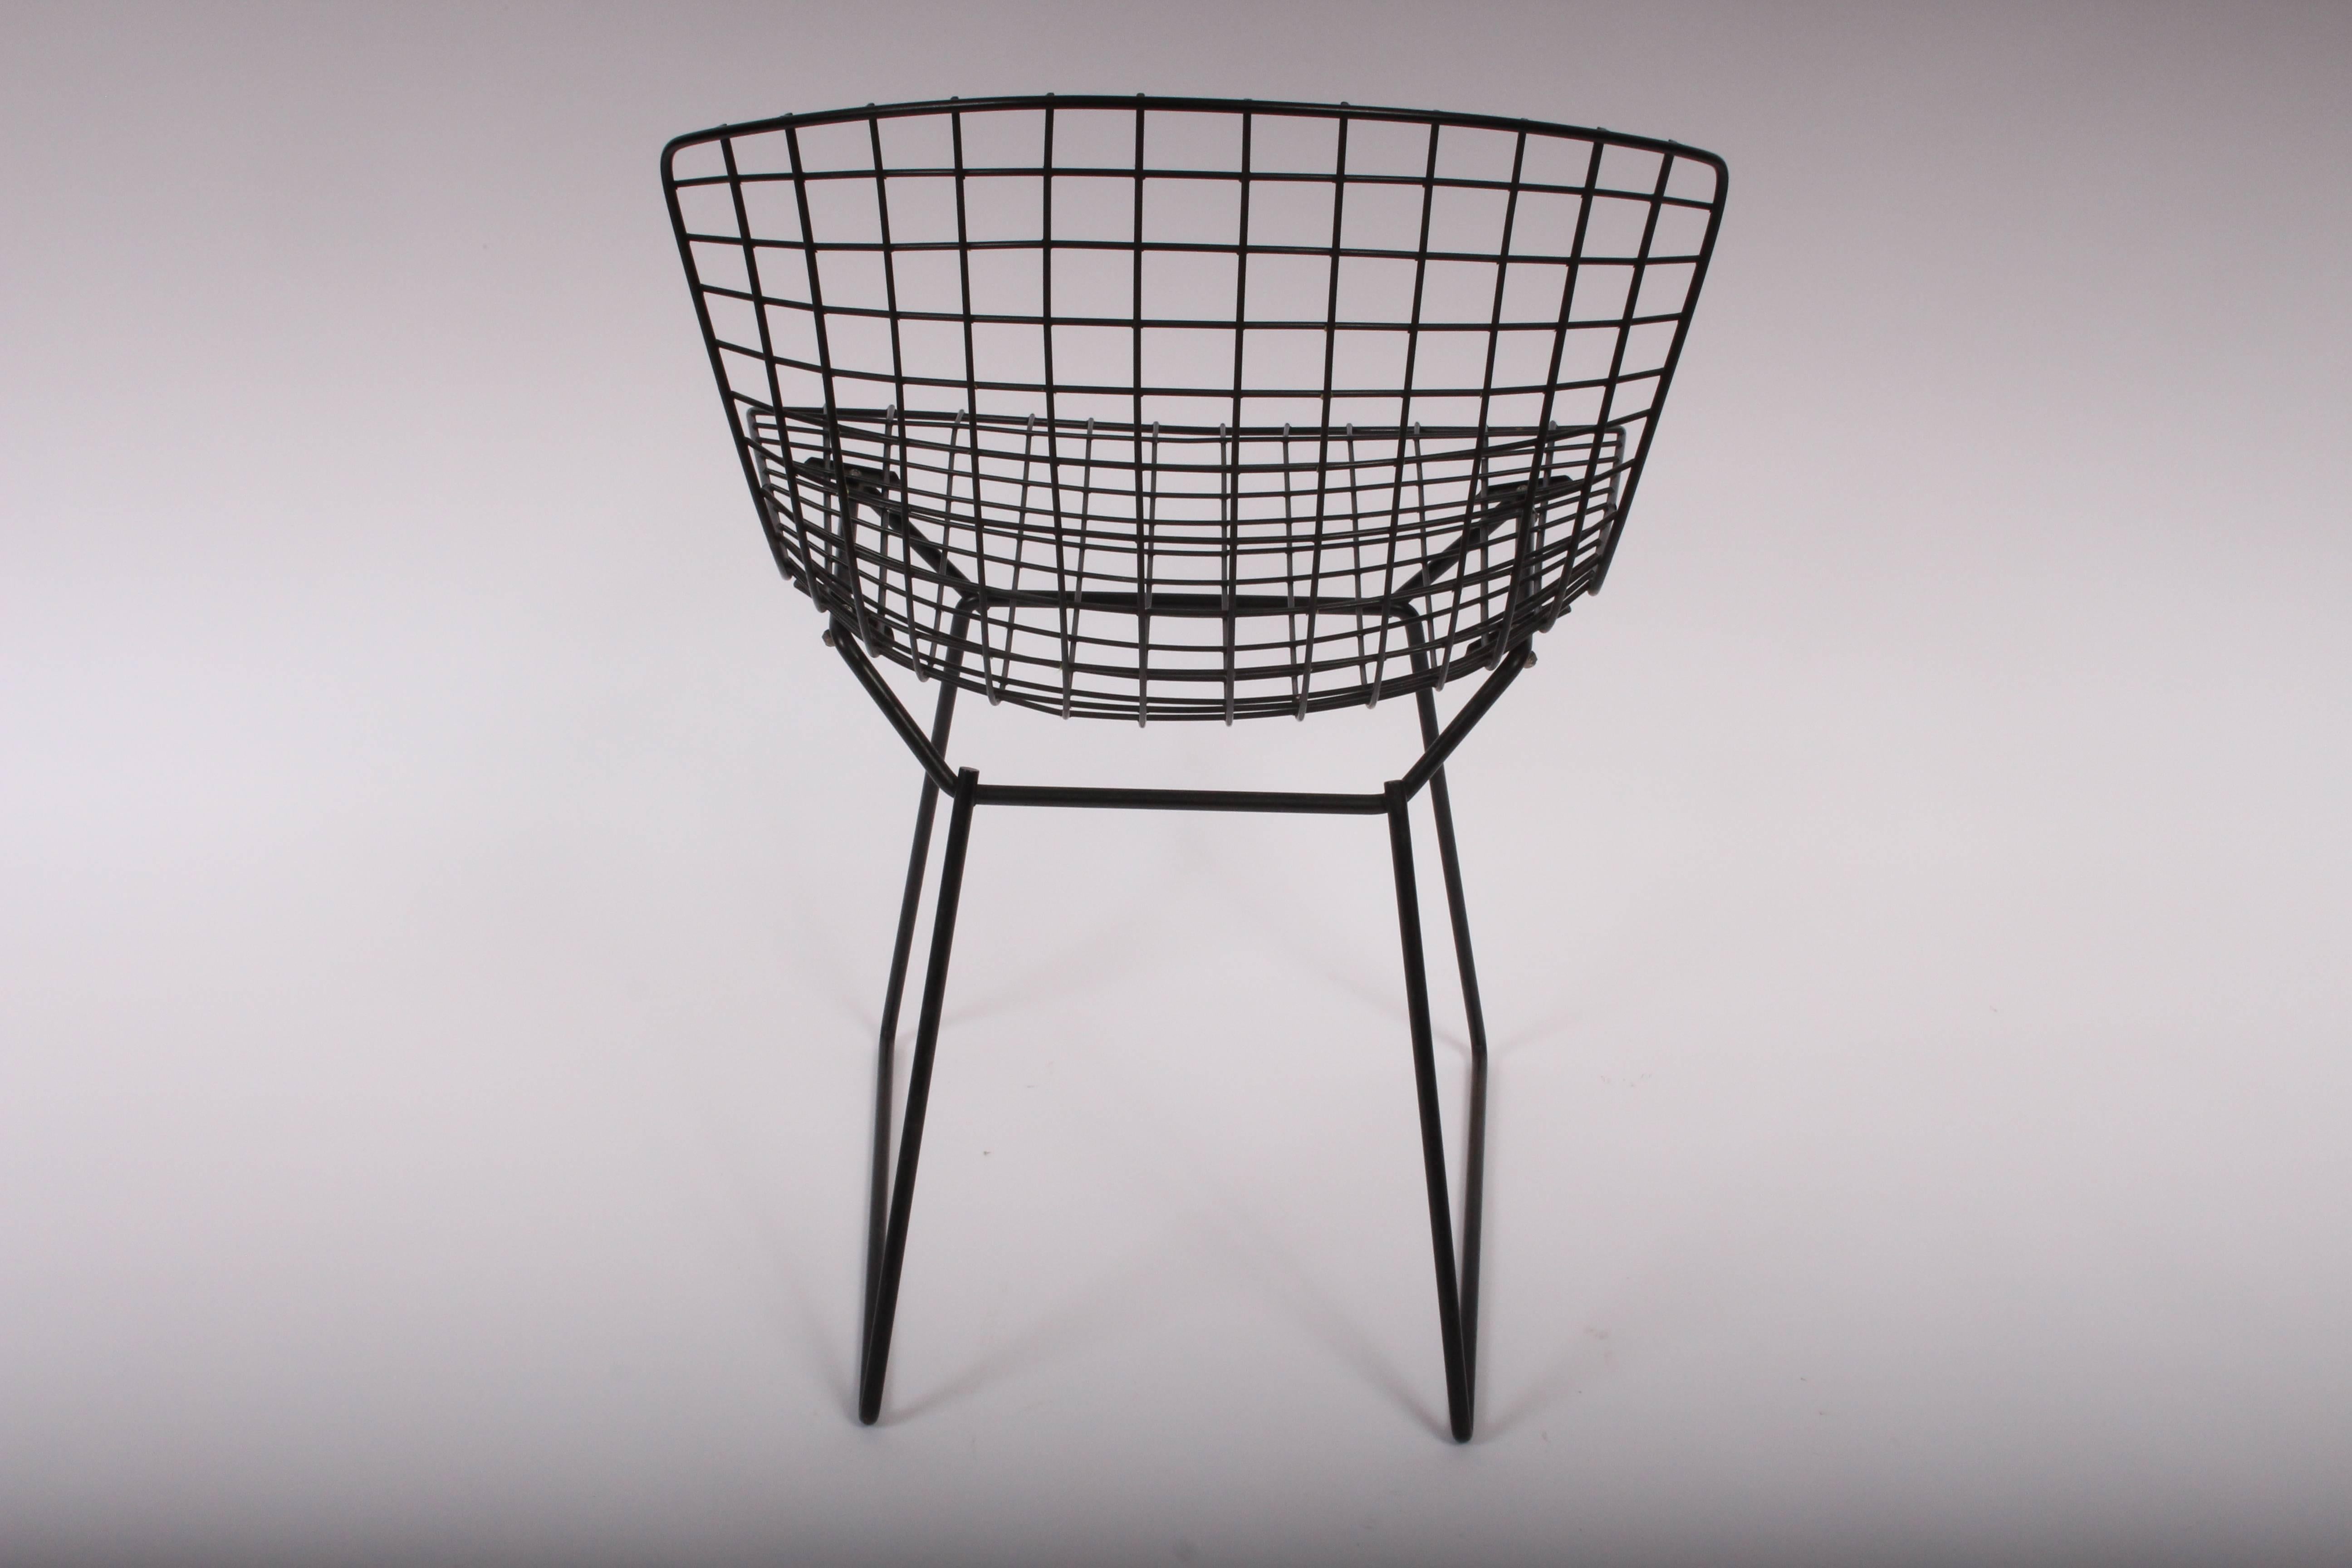 1950s-1960s Original Harry Bertoia for Knoll Indoor Outdoor Black Wire Side Chairs. Enameled Black Wire. Complete with two-piece Black vinyl seat and back cushions. Foam needs replacement. Most vinyl covers have Knoll tag. Original paint. Saw indoor